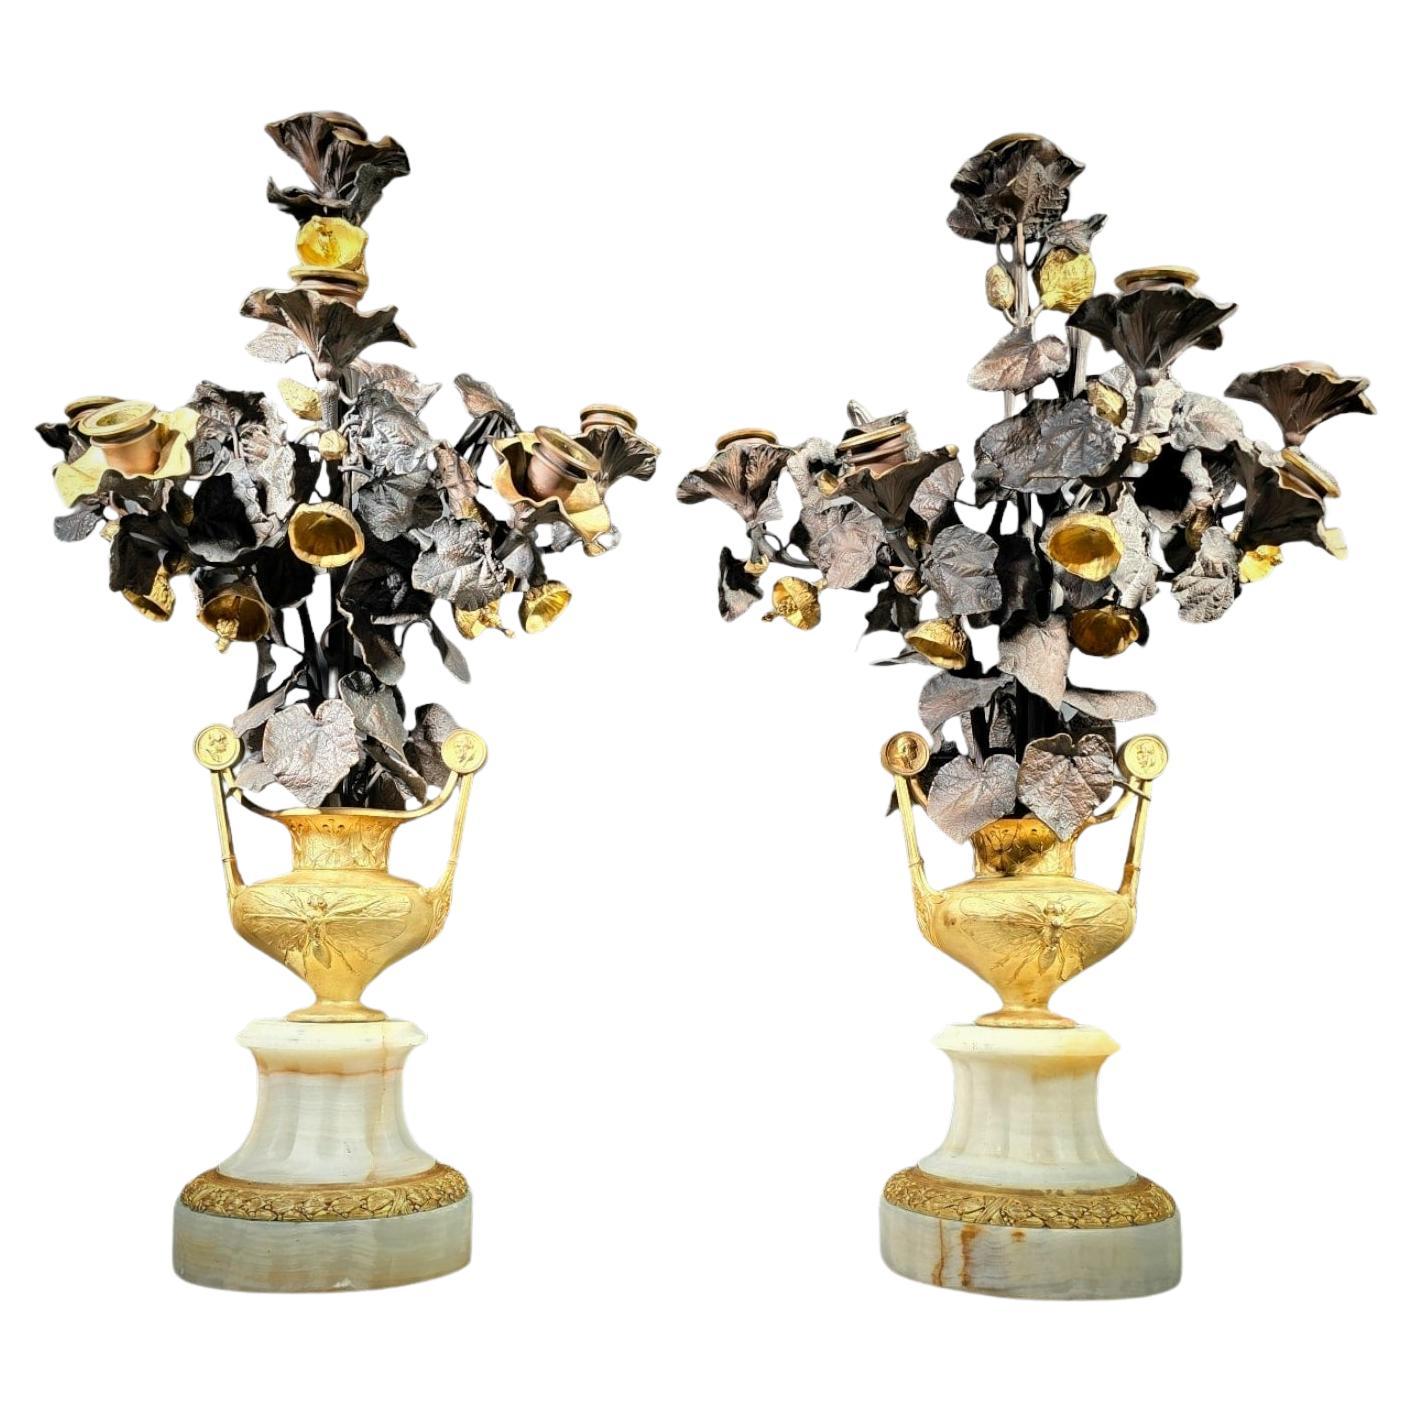 Stunning Gilt Bronze Vases with Flowers, Possibly Italian from the 19th Century For Sale